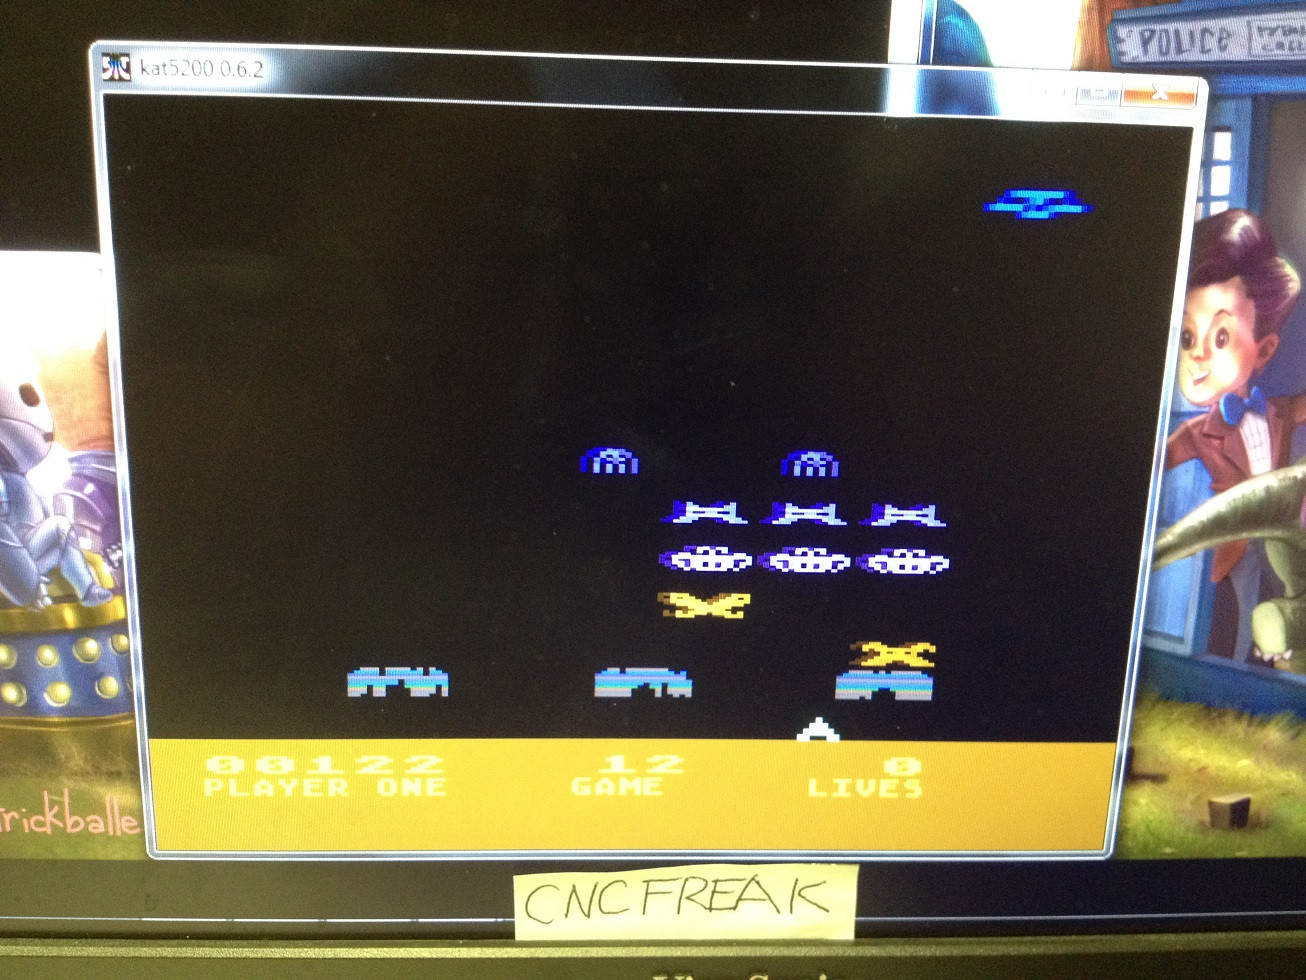 cncfreak: Space Invaders: Game 12 (Atari 5200 Emulated) 122 points on 2013-10-15 10:25:58